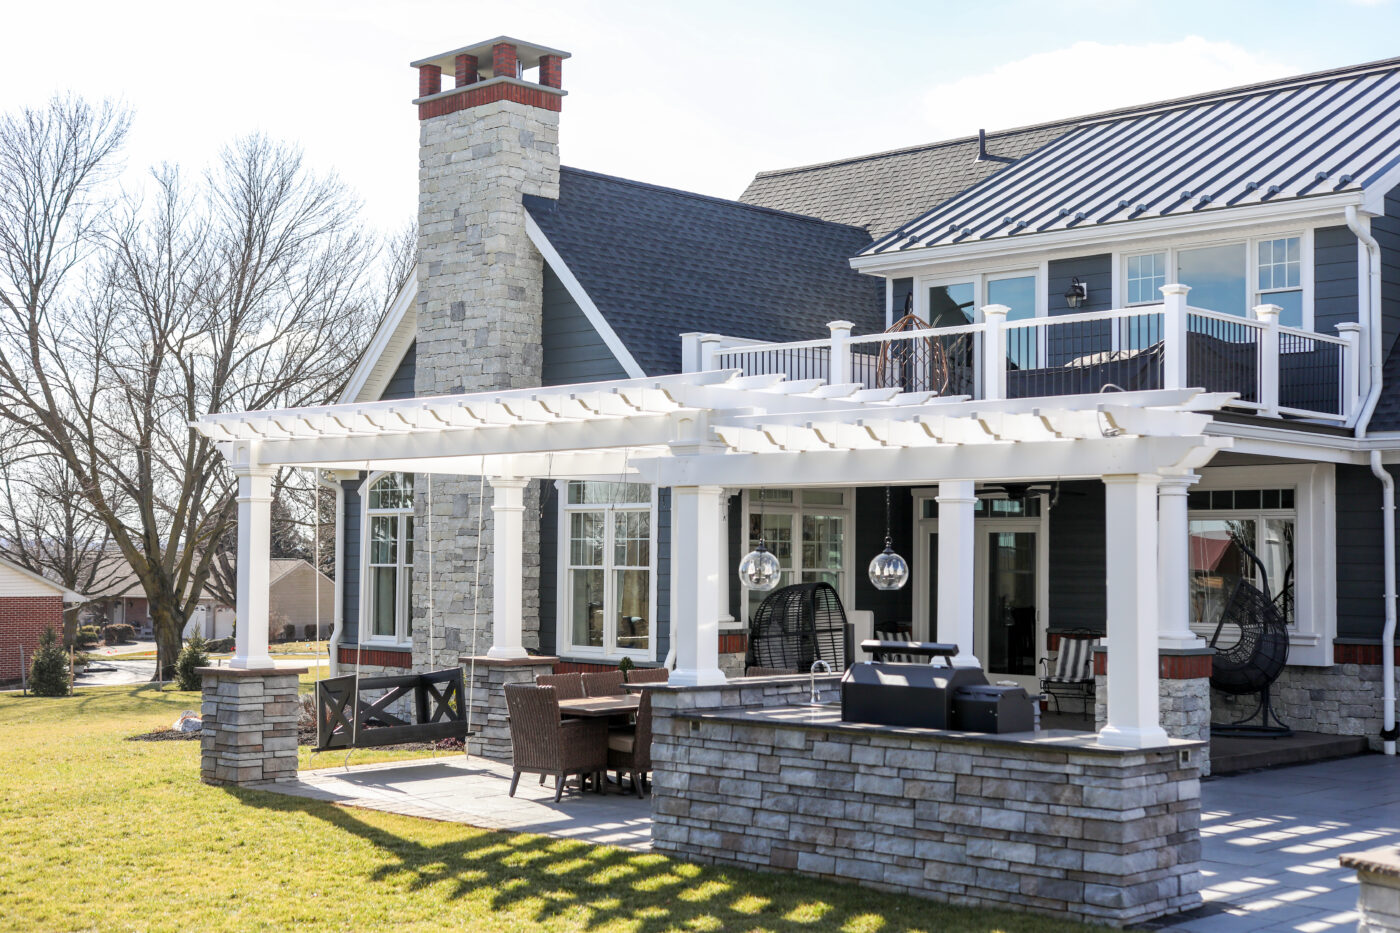 Paver Patio and Pergola for entertaining Friends and Family(2)